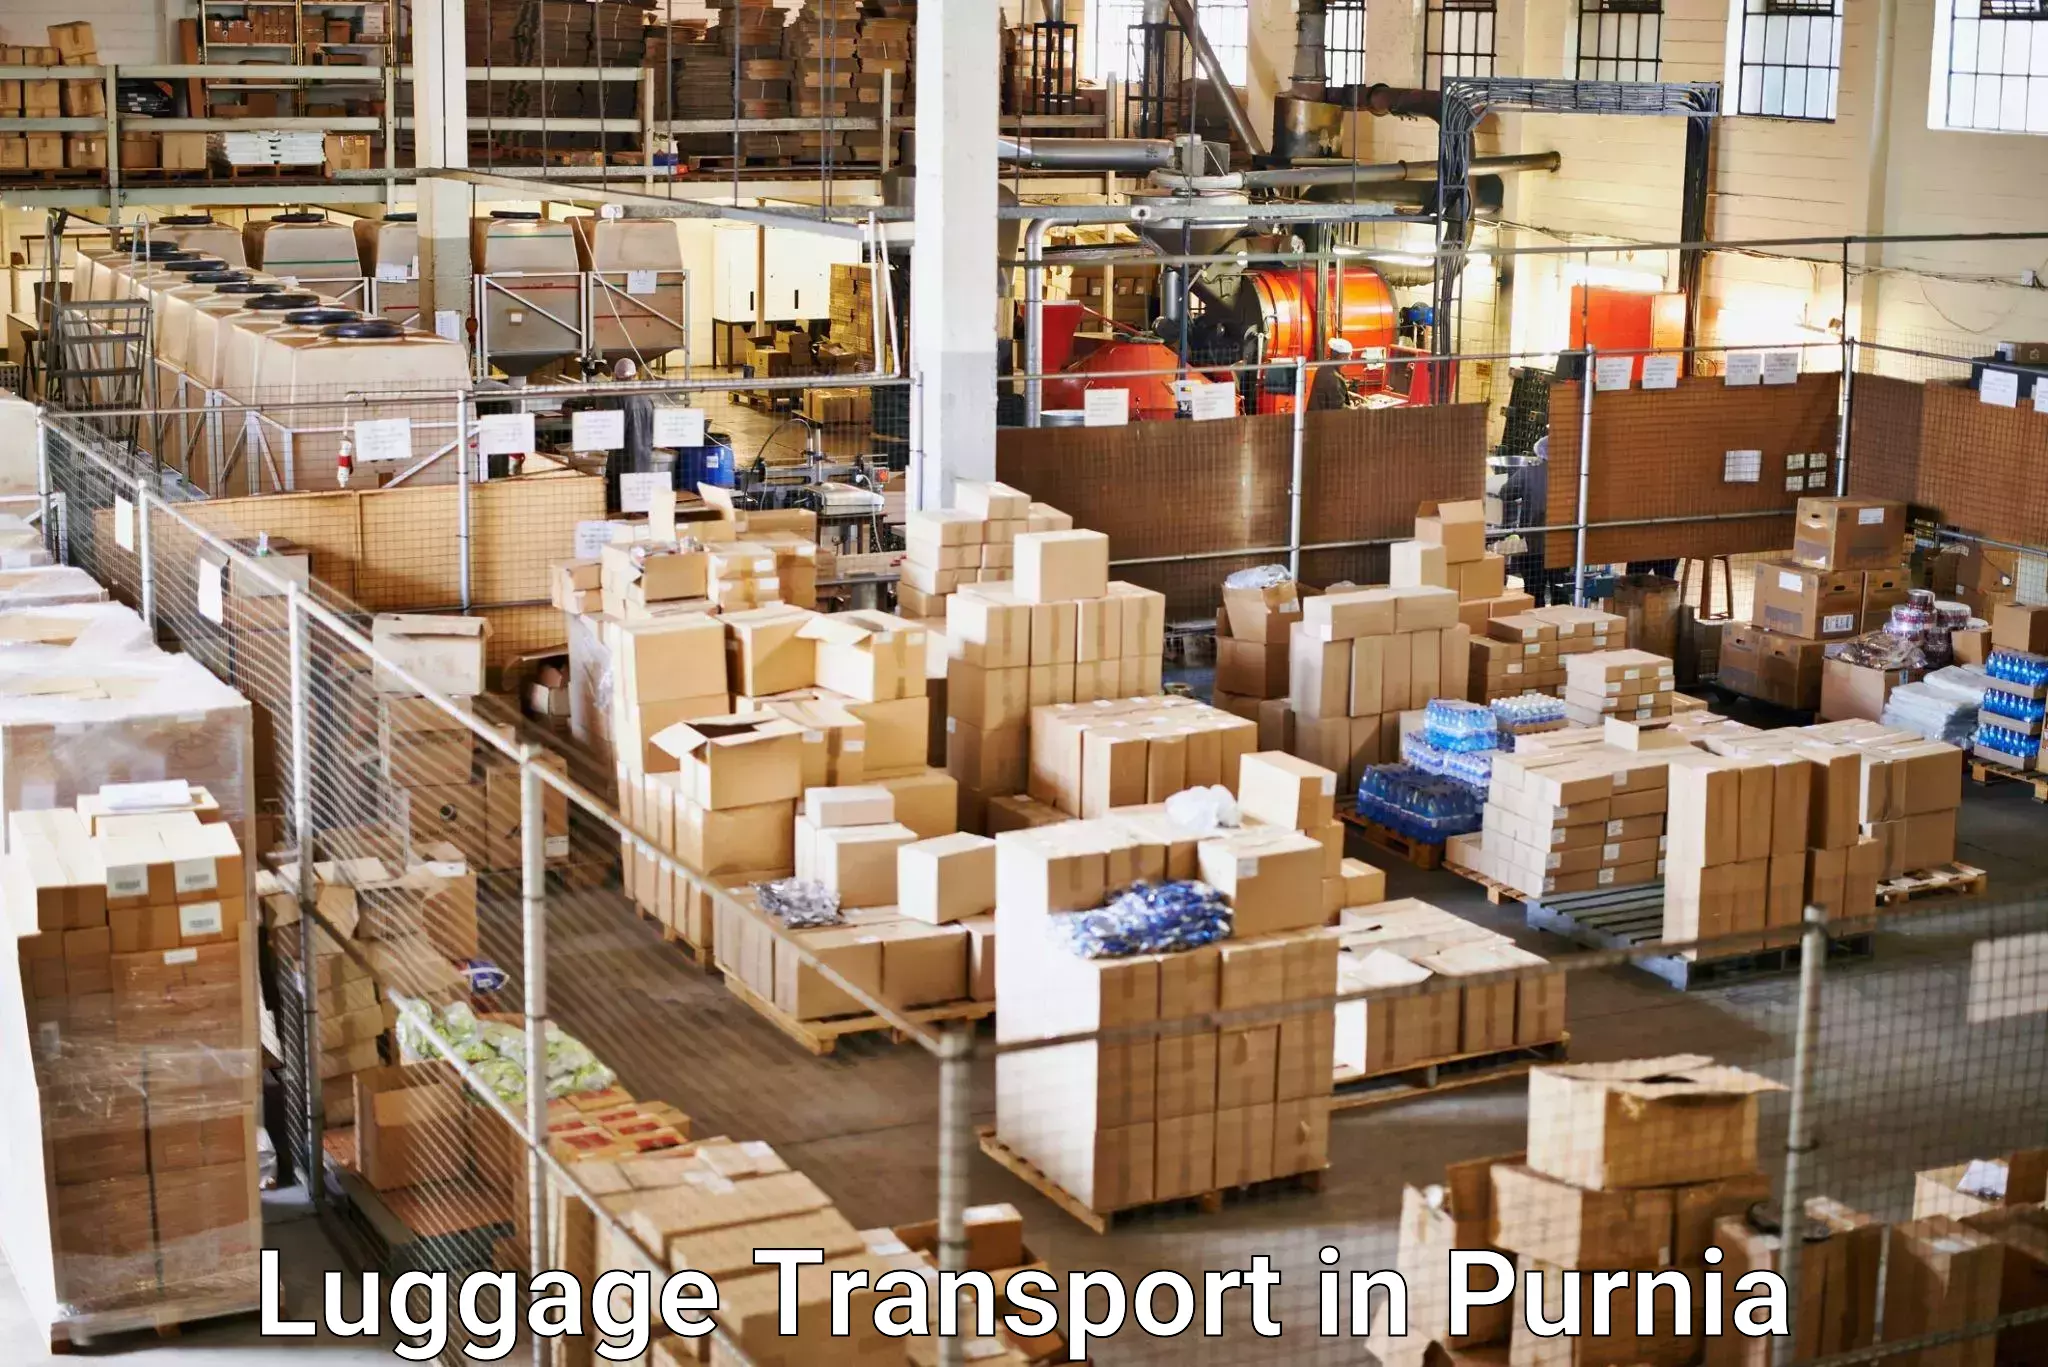 Baggage shipping experience in Purnia